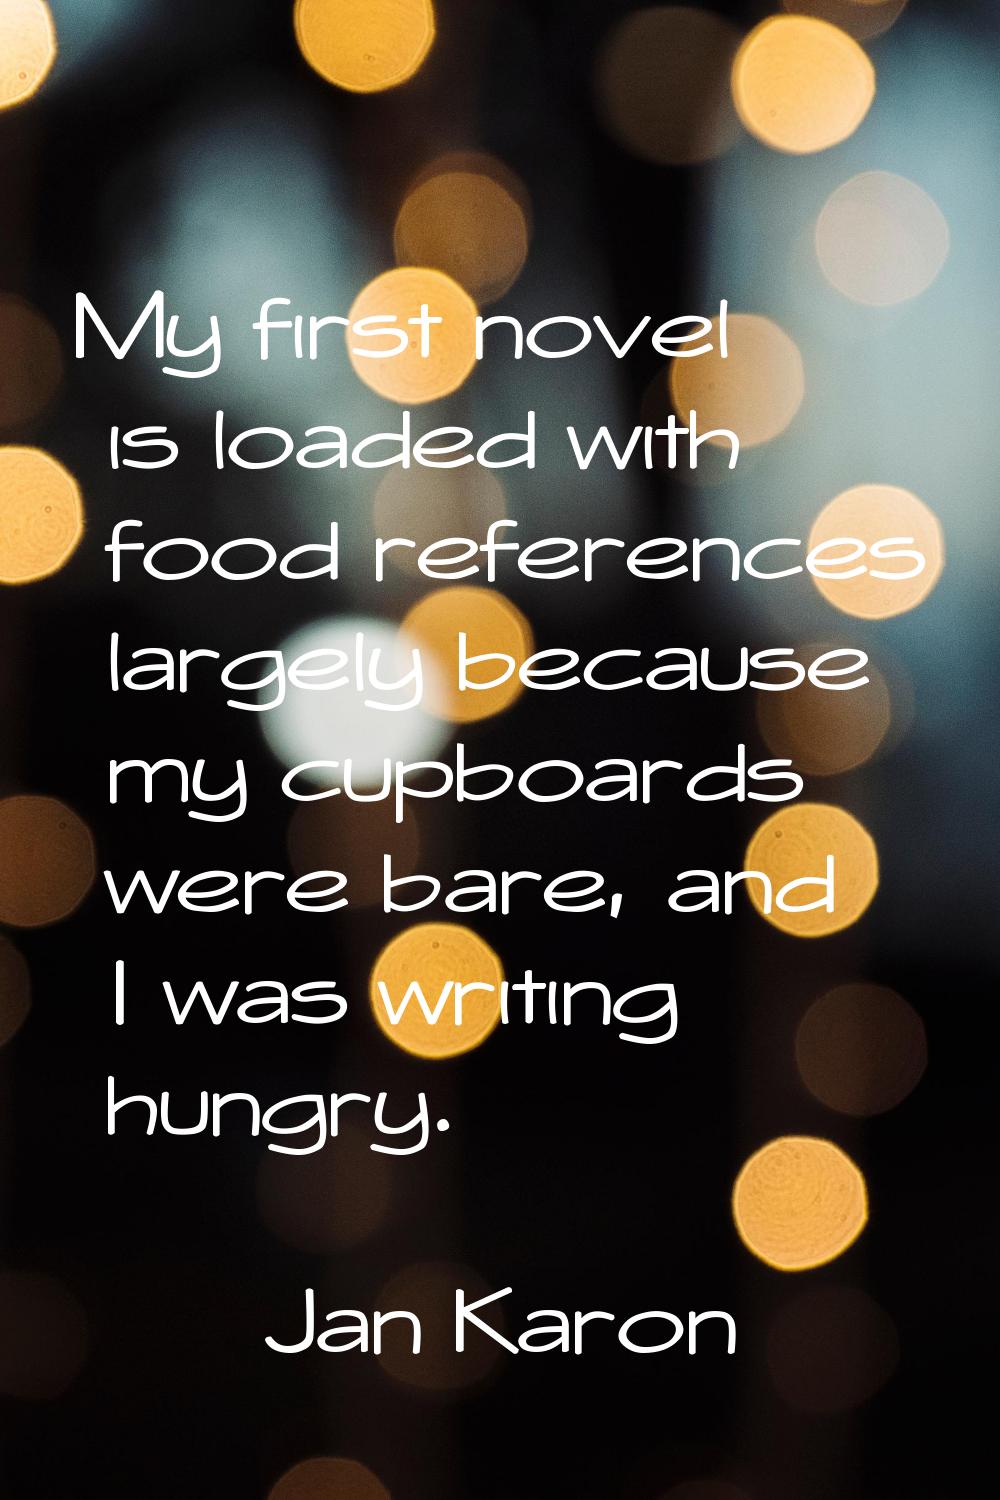 My first novel is loaded with food references largely because my cupboards were bare, and I was wri